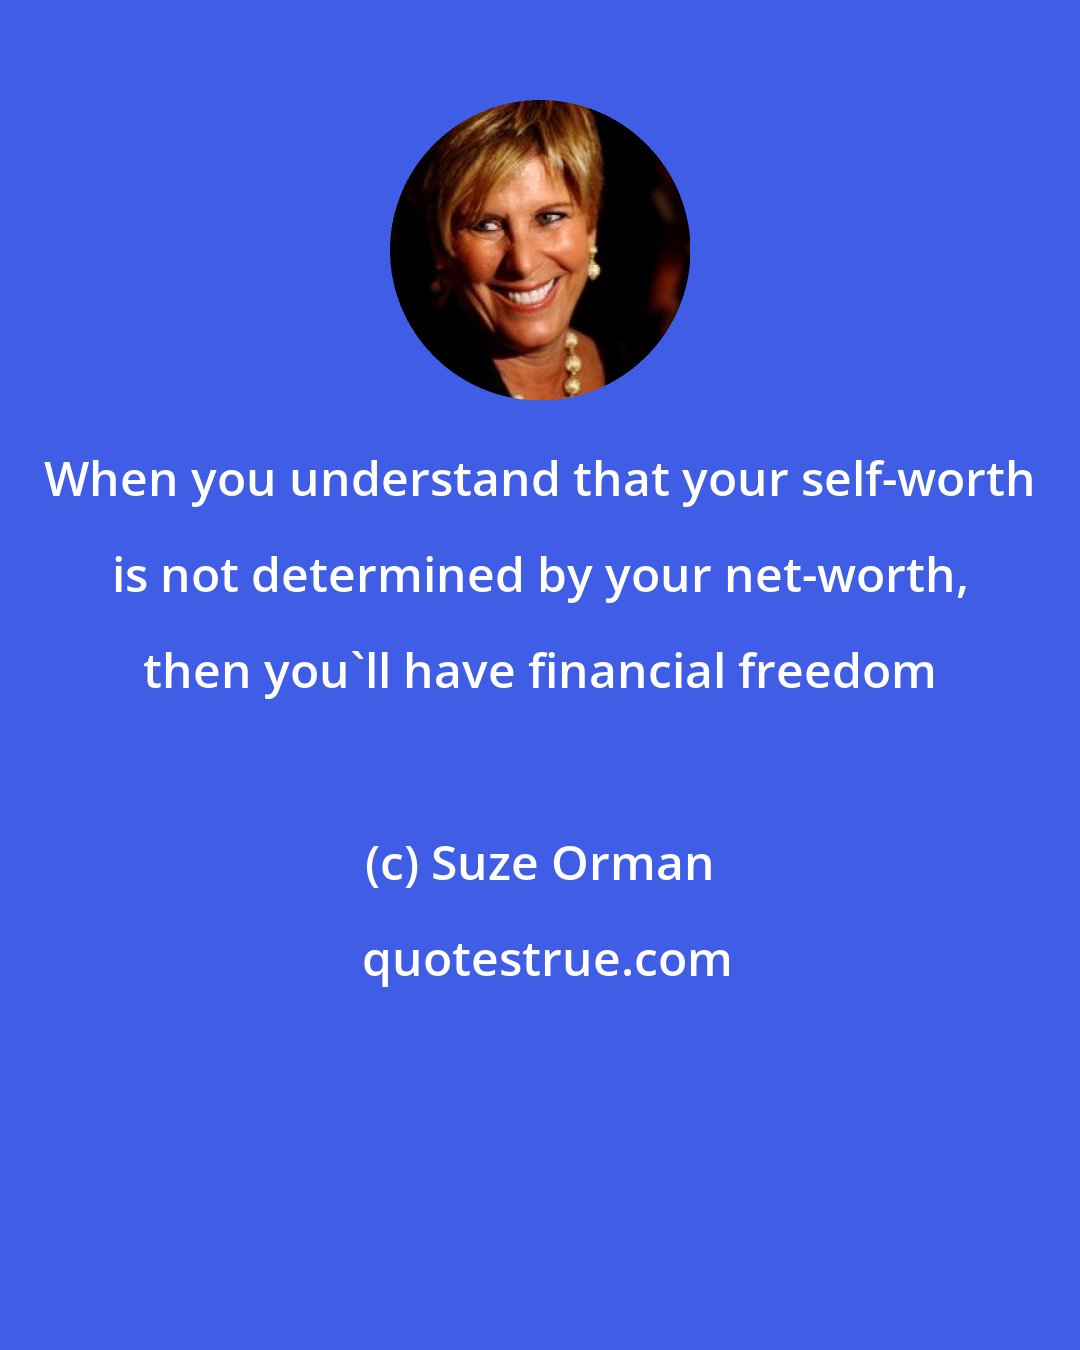 Suze Orman: When you understand that your self-worth is not determined by your net-worth, then you'll have financial freedom